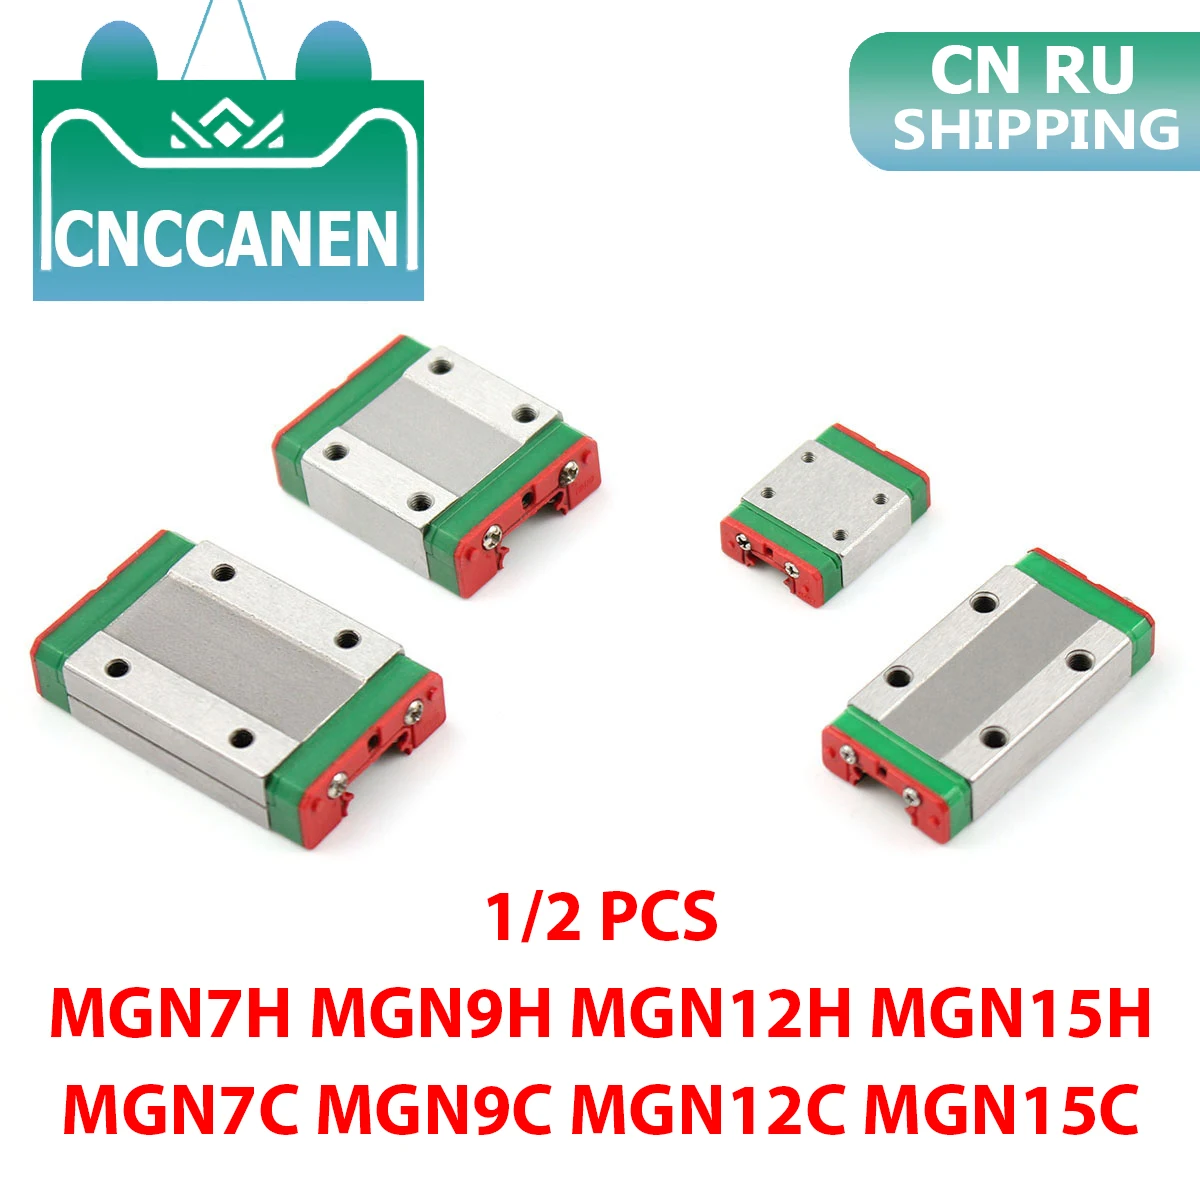 

1/2PCS MGN12H MGN9H MGN15H MGN15C MGN7H MGN7C MGN9C MGN12C Carriage Block for MGN9 MGN12 MGN15 MGN Linear Rail Guide CNC Parts